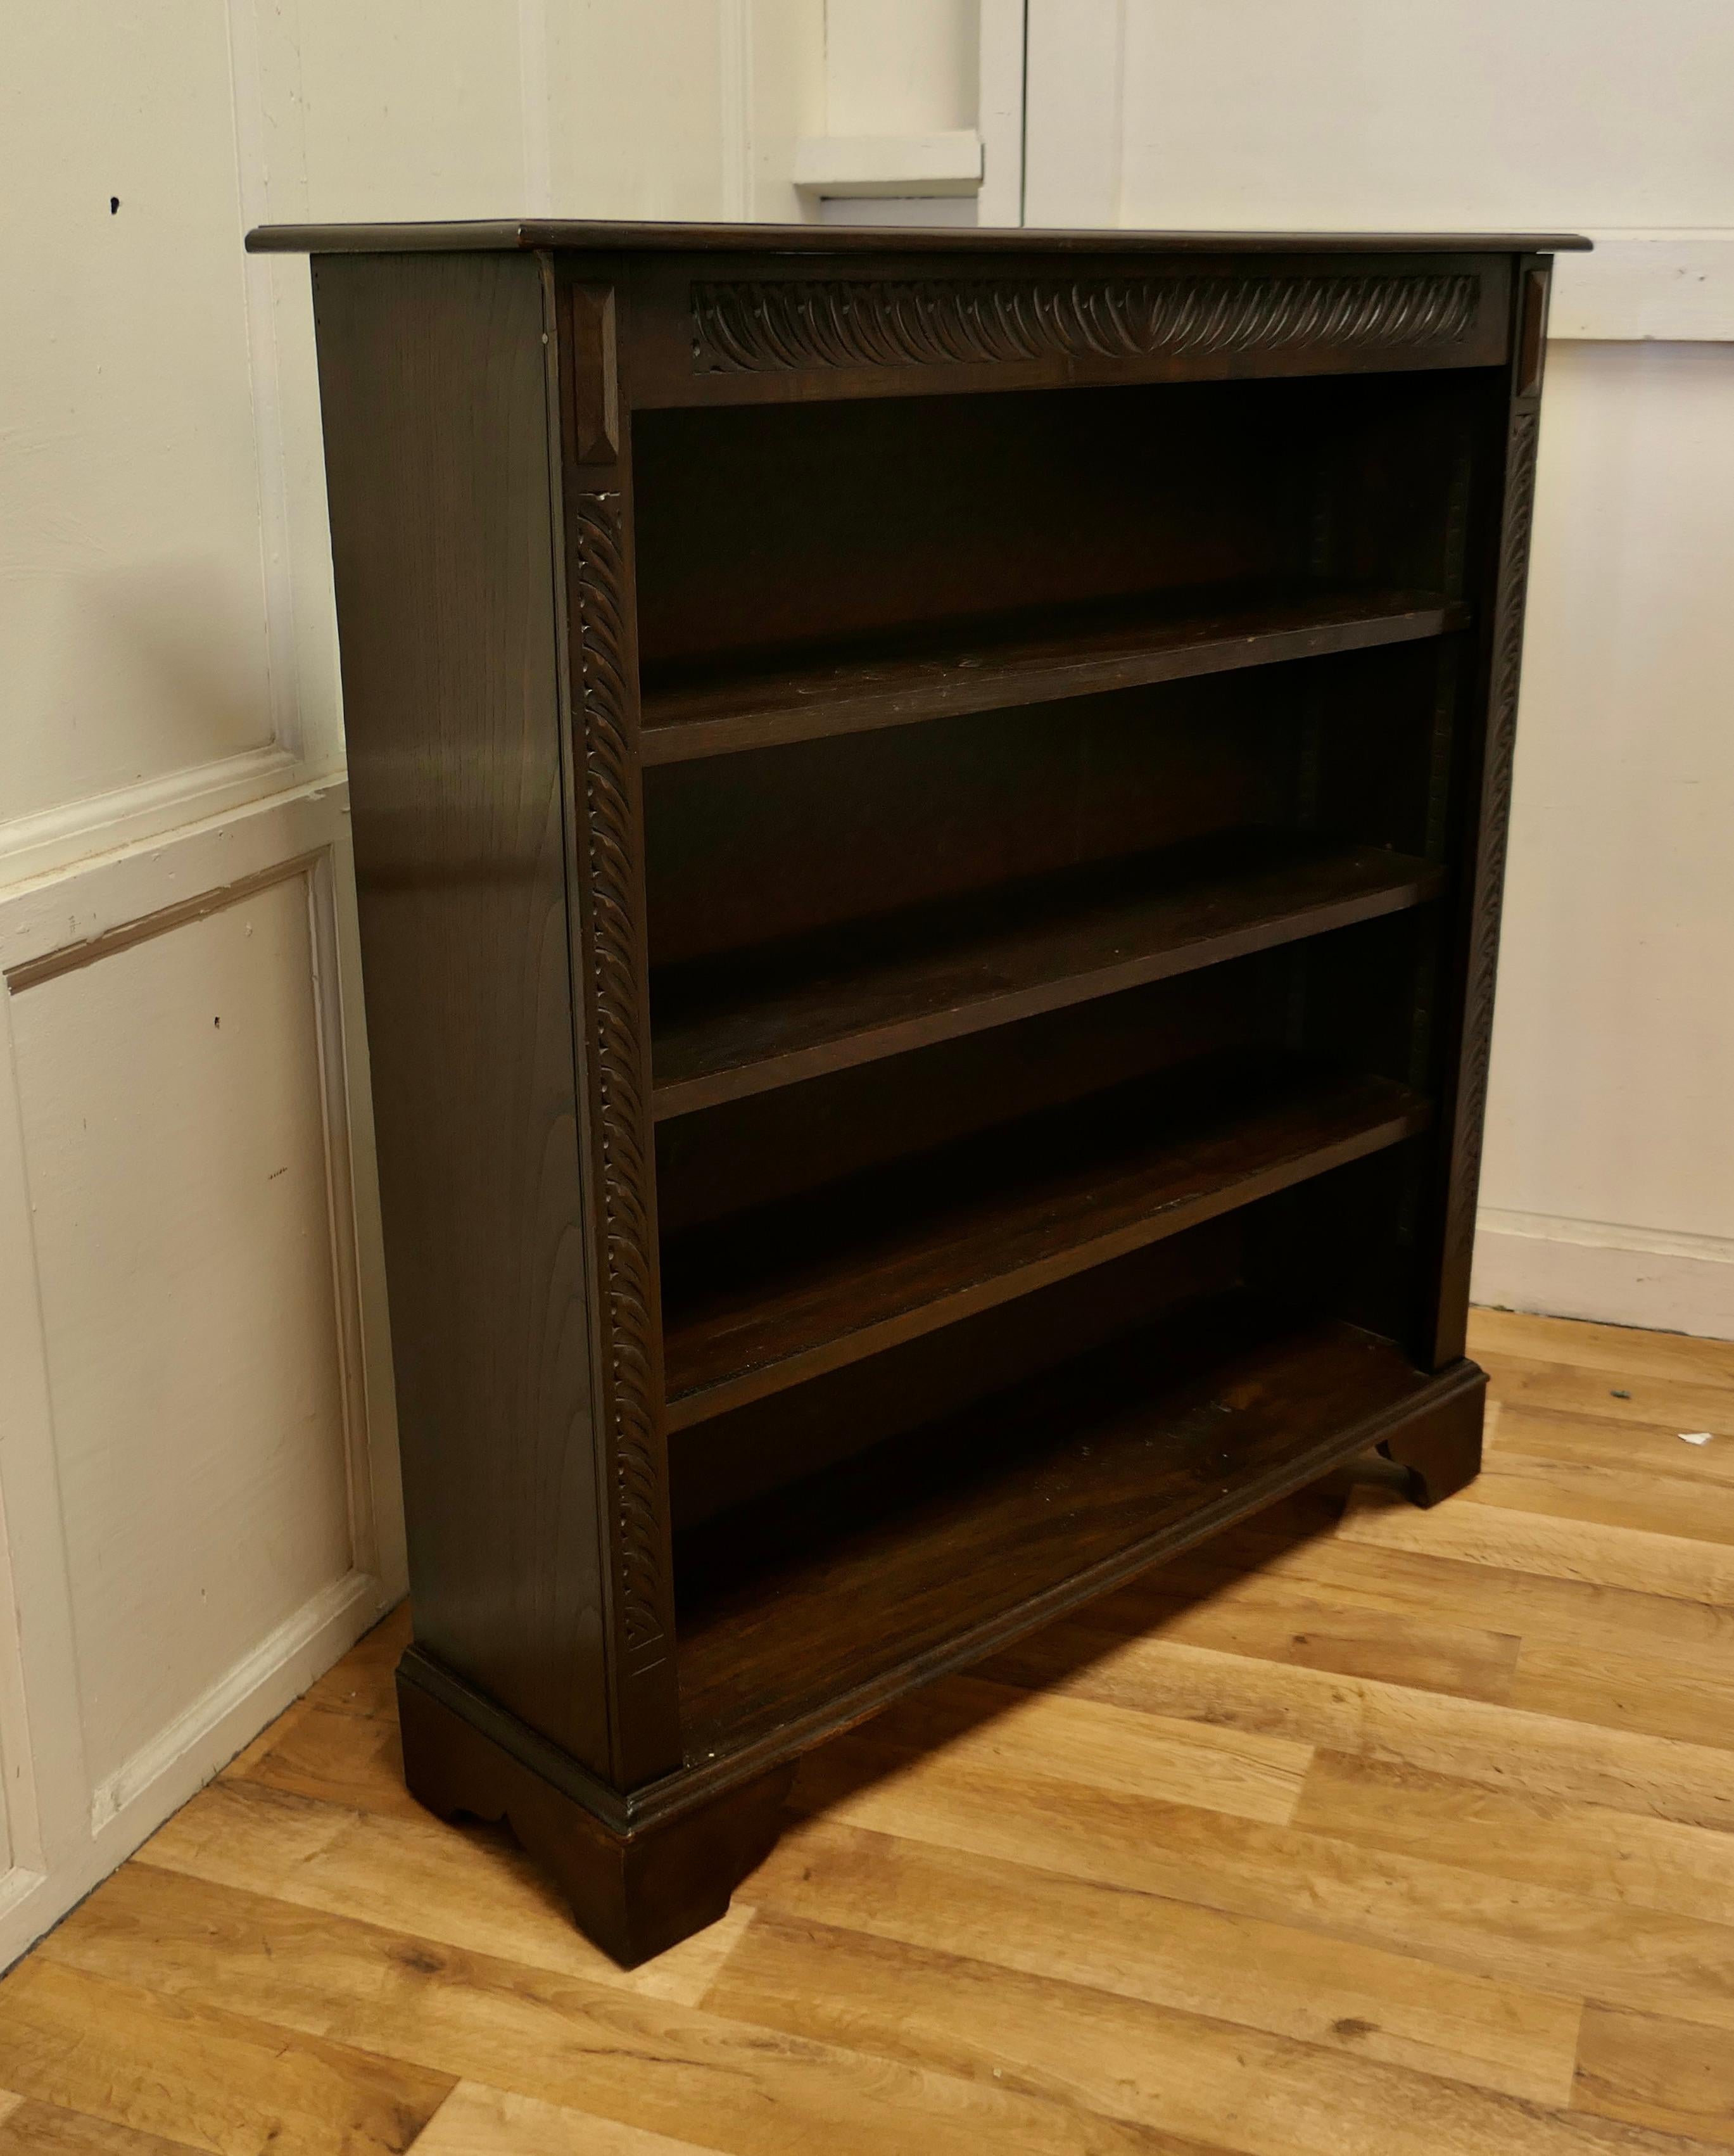 Carved Oak Open bookcase.

The bookcase is good quality, with attractive carving on the front, it has 3 adjustable shelves

The bookcase is in excellent original condition and the shelves are adjustable 
This excellent piece of Oak Furniture